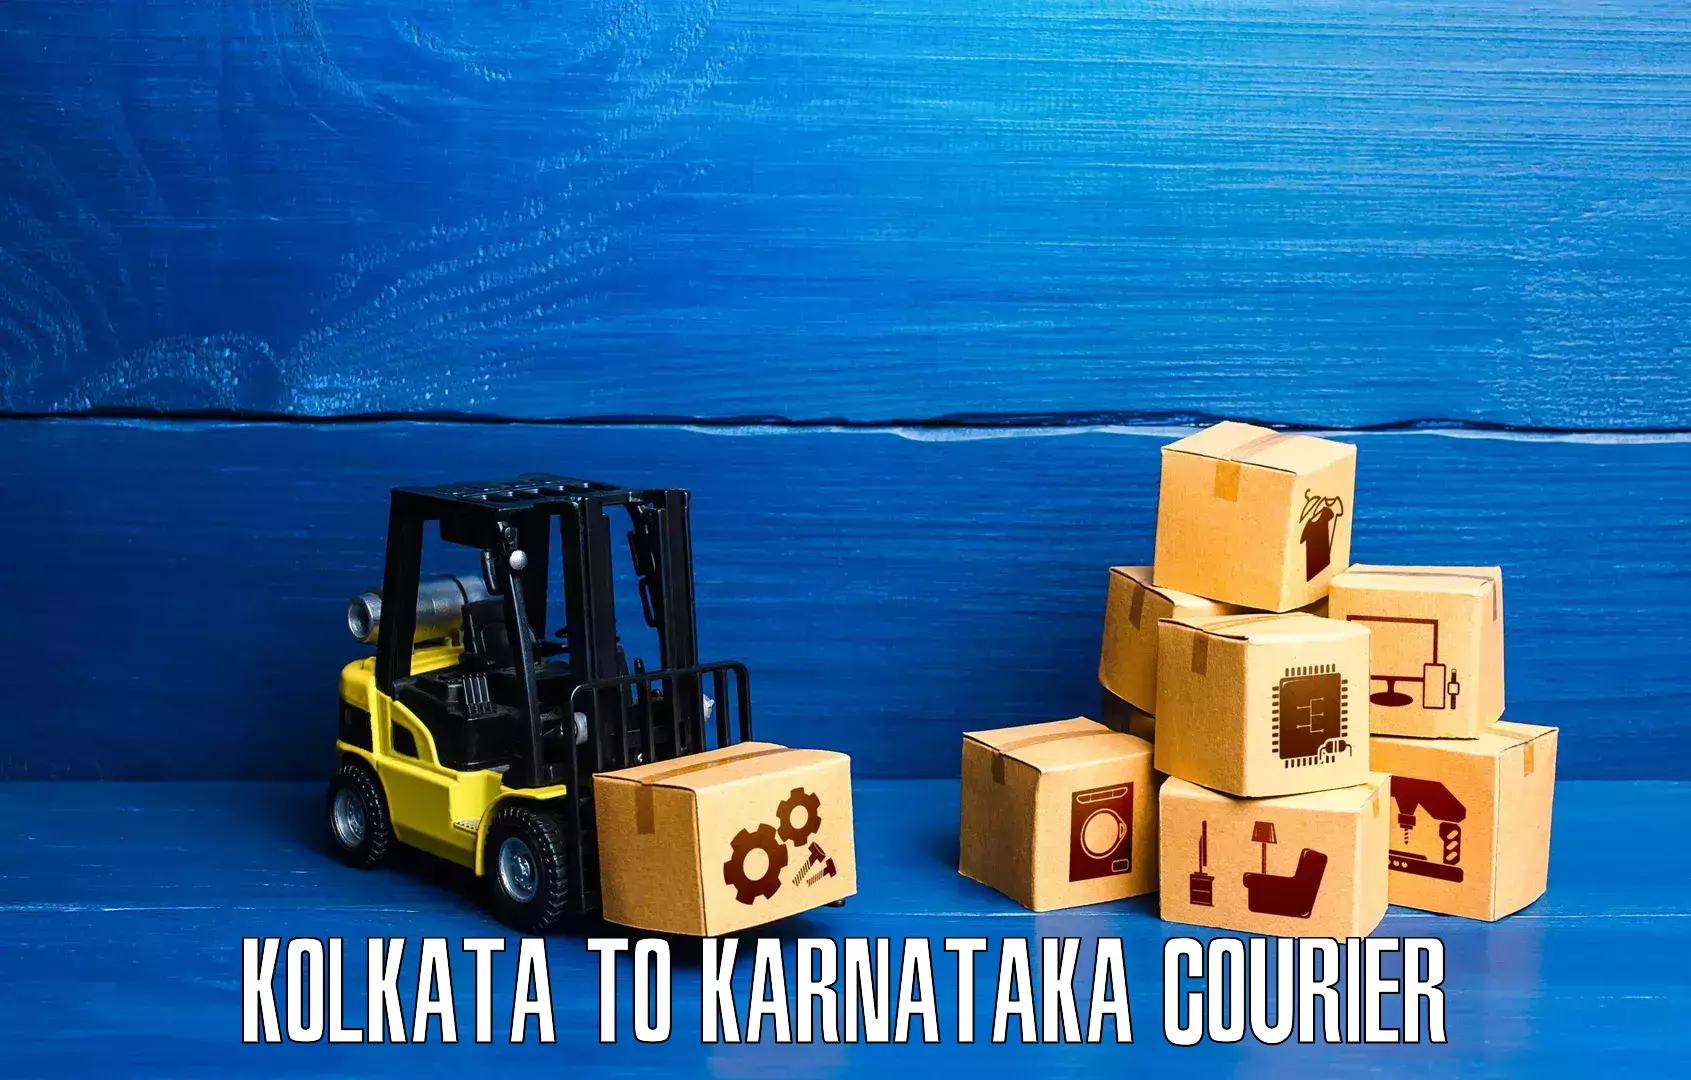 Secure freight services Kolkata to Manipal Academy of Higher Education